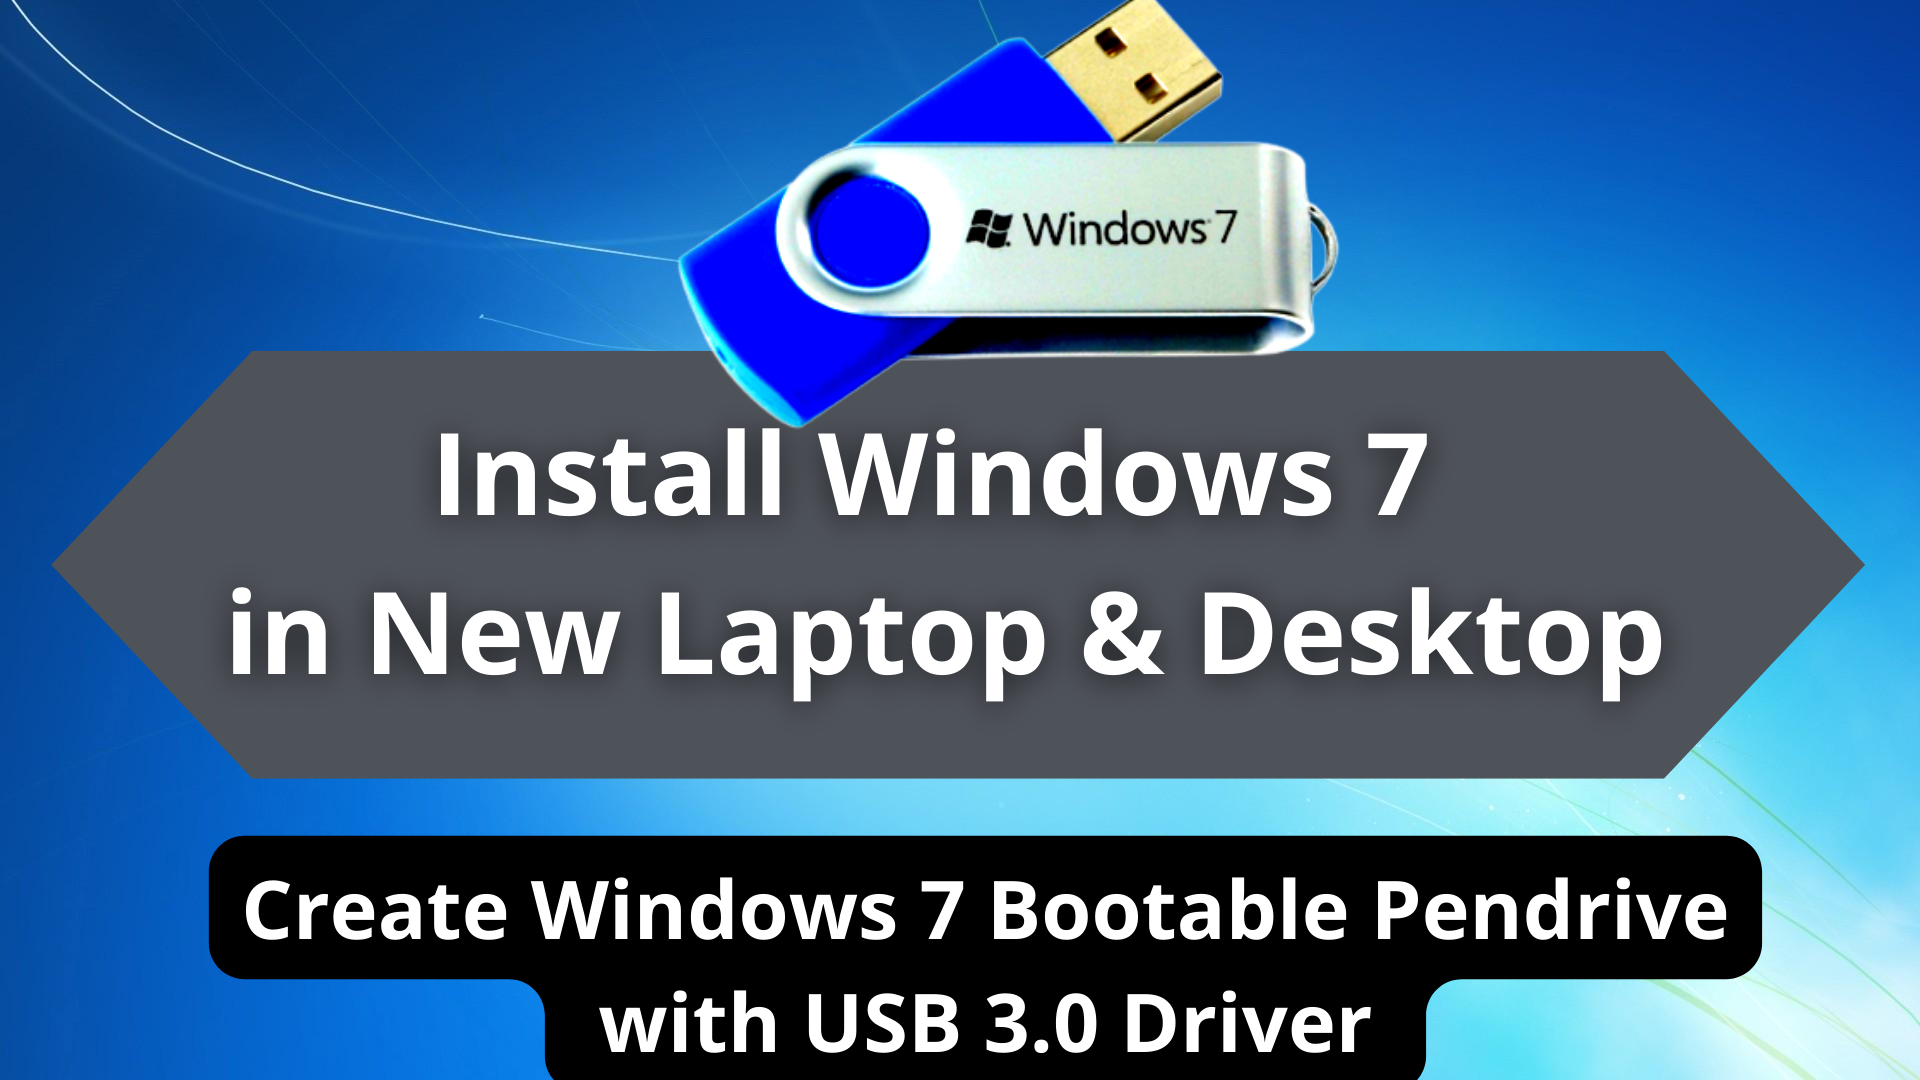 Install Windows 7 without any | Create Windows 7 Bootable USB Pendrive with USB 3.0 Driver | Windows Image Tool